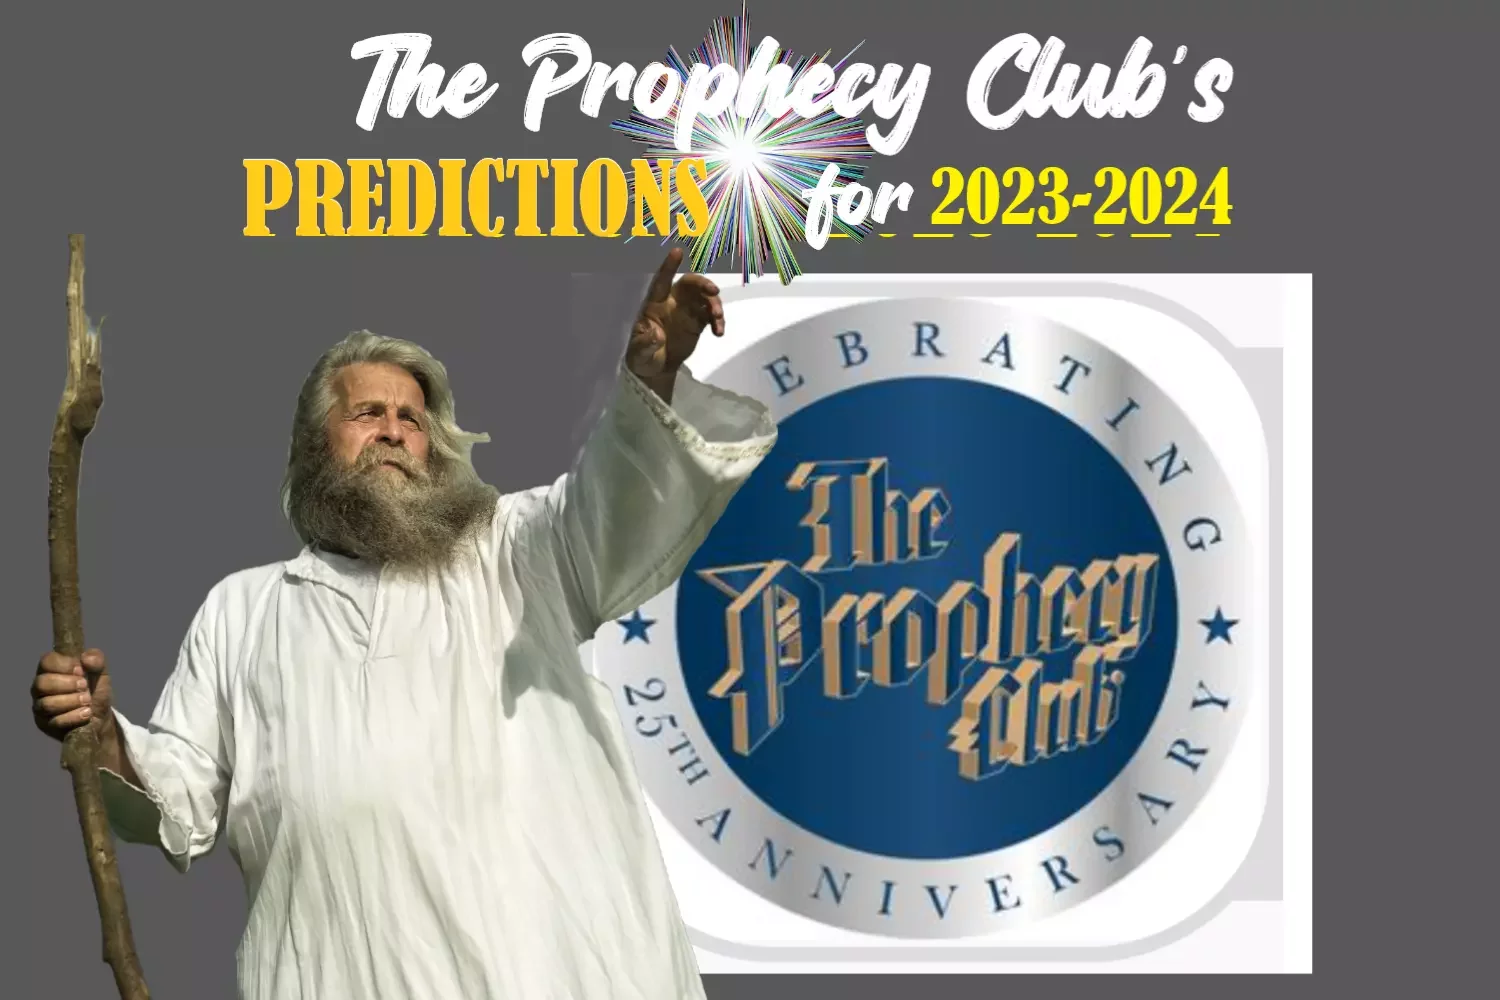 PROPHECY CLUB PREDICTIONS FOR 2023-2024